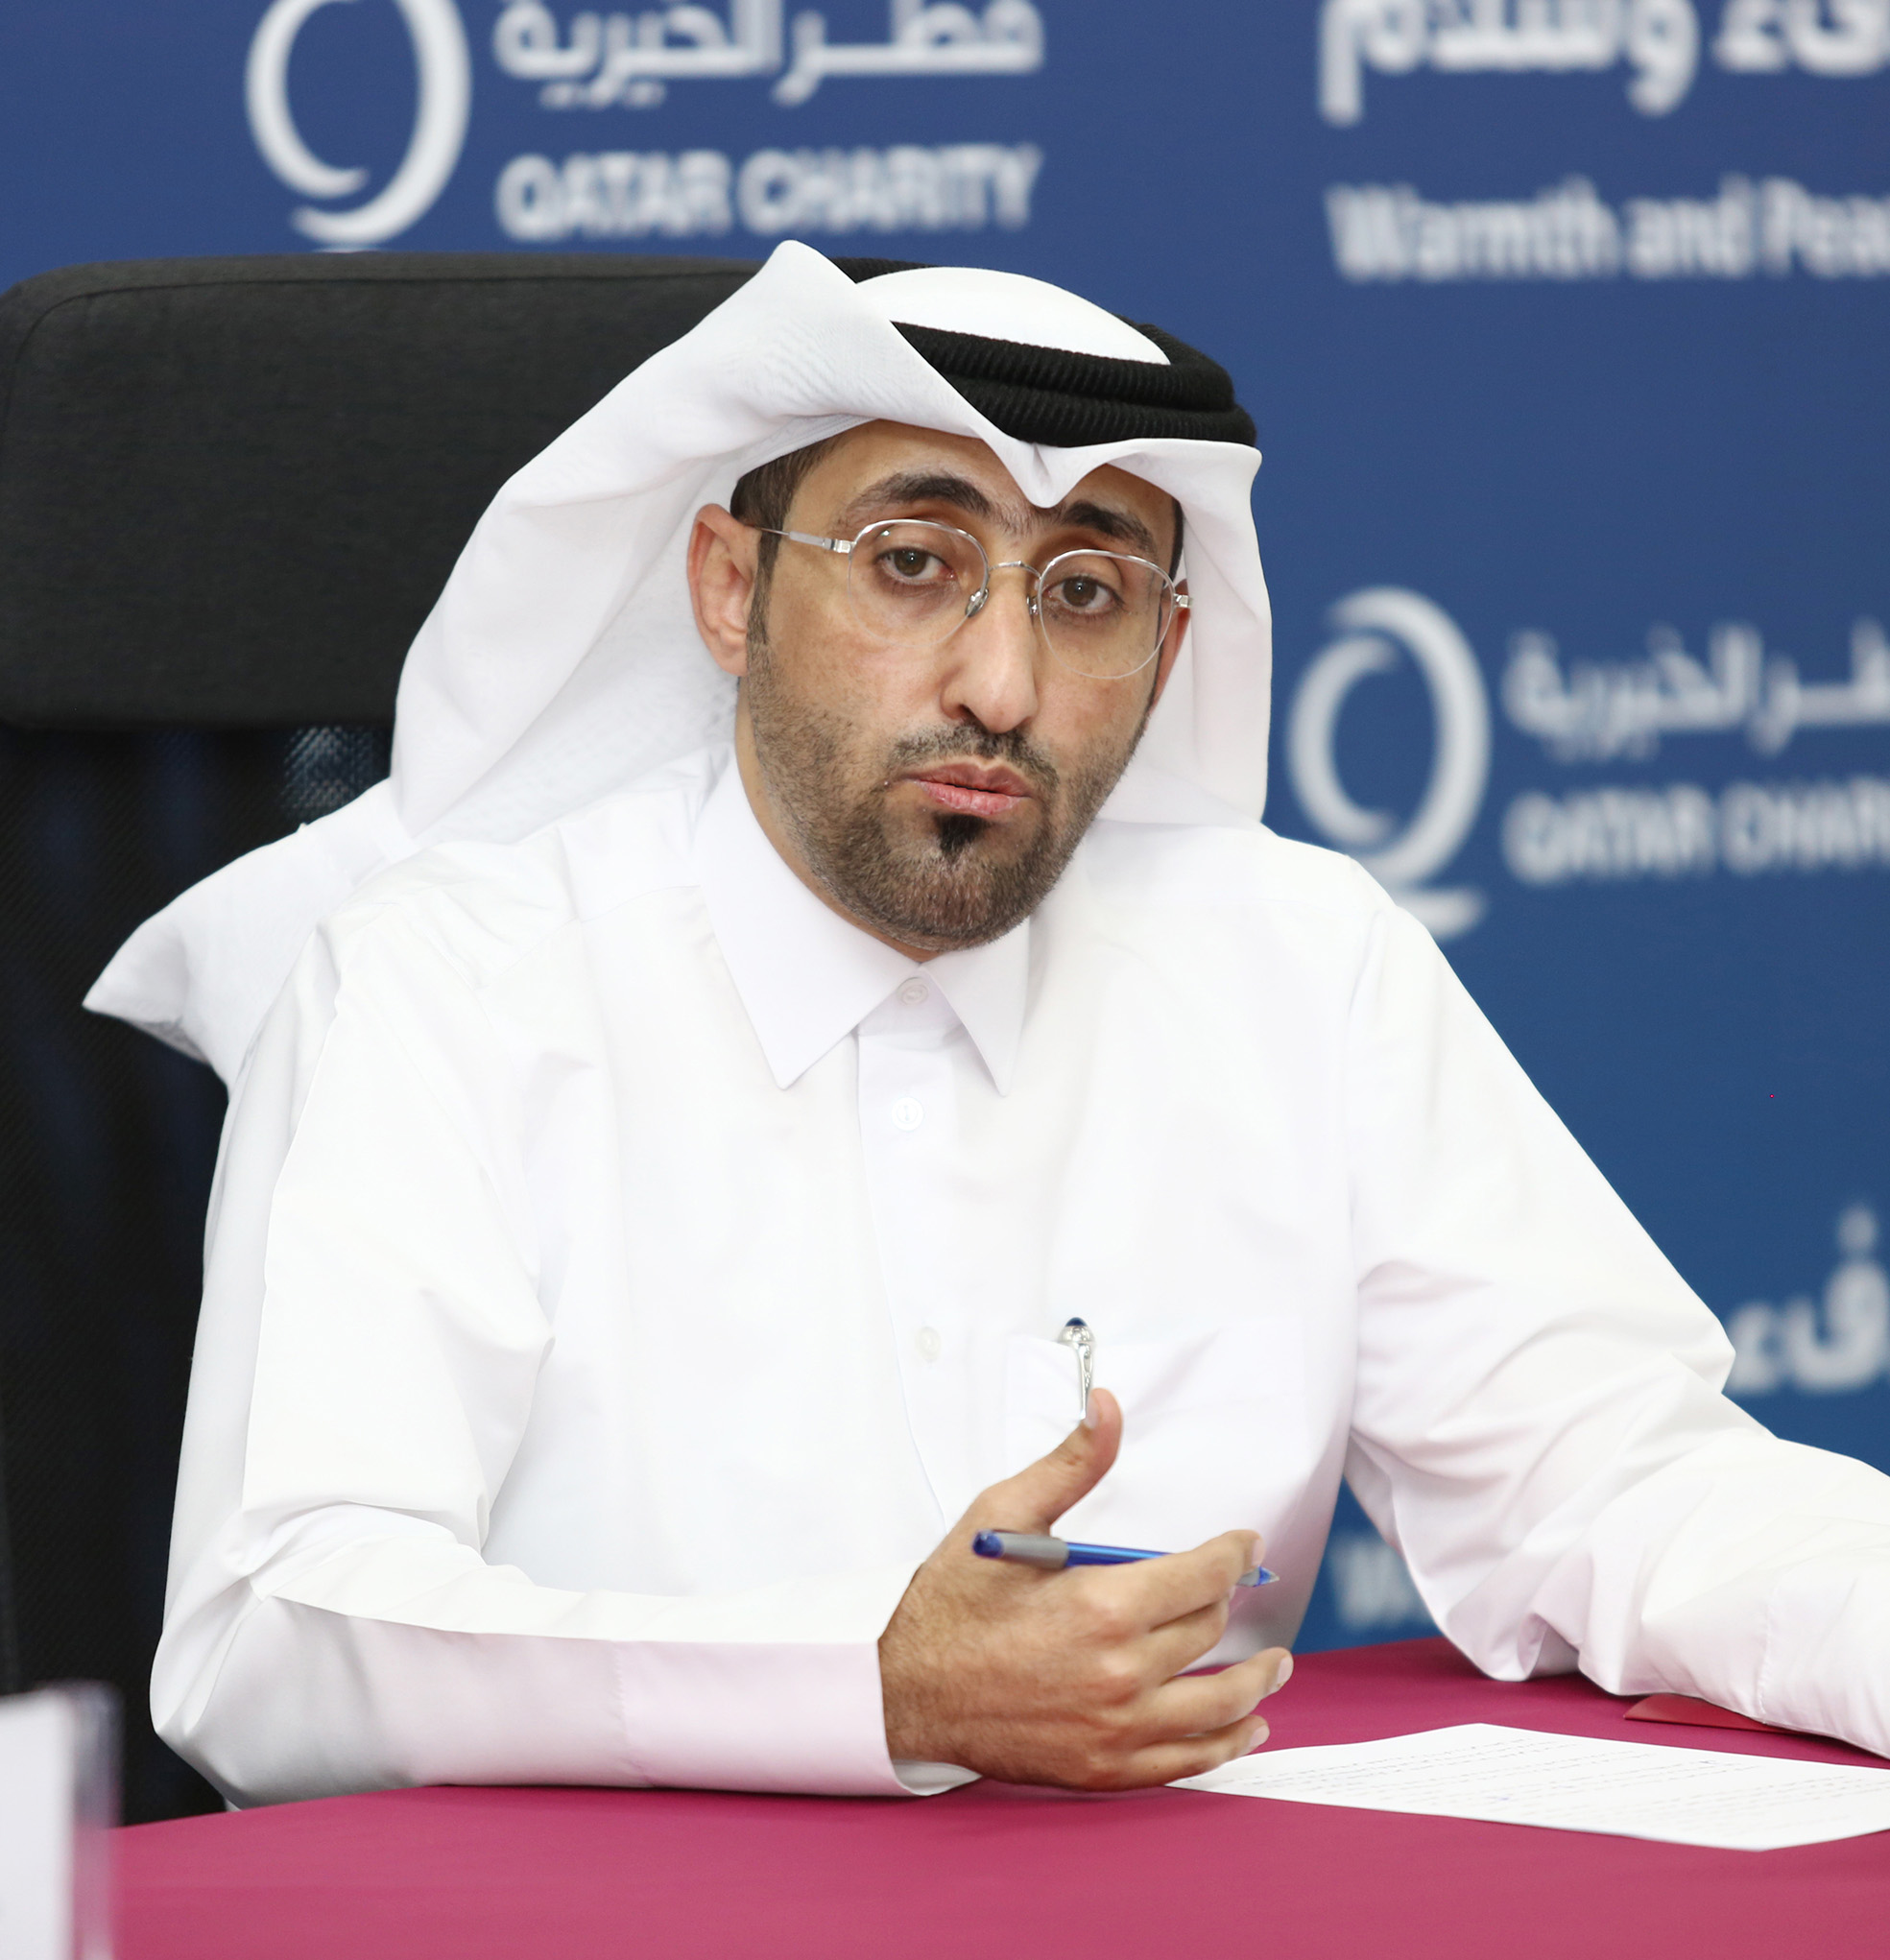 Mr. Khalid Abdulla Alyafei, Director of the Emergency and Relief Department at Qatar Charity